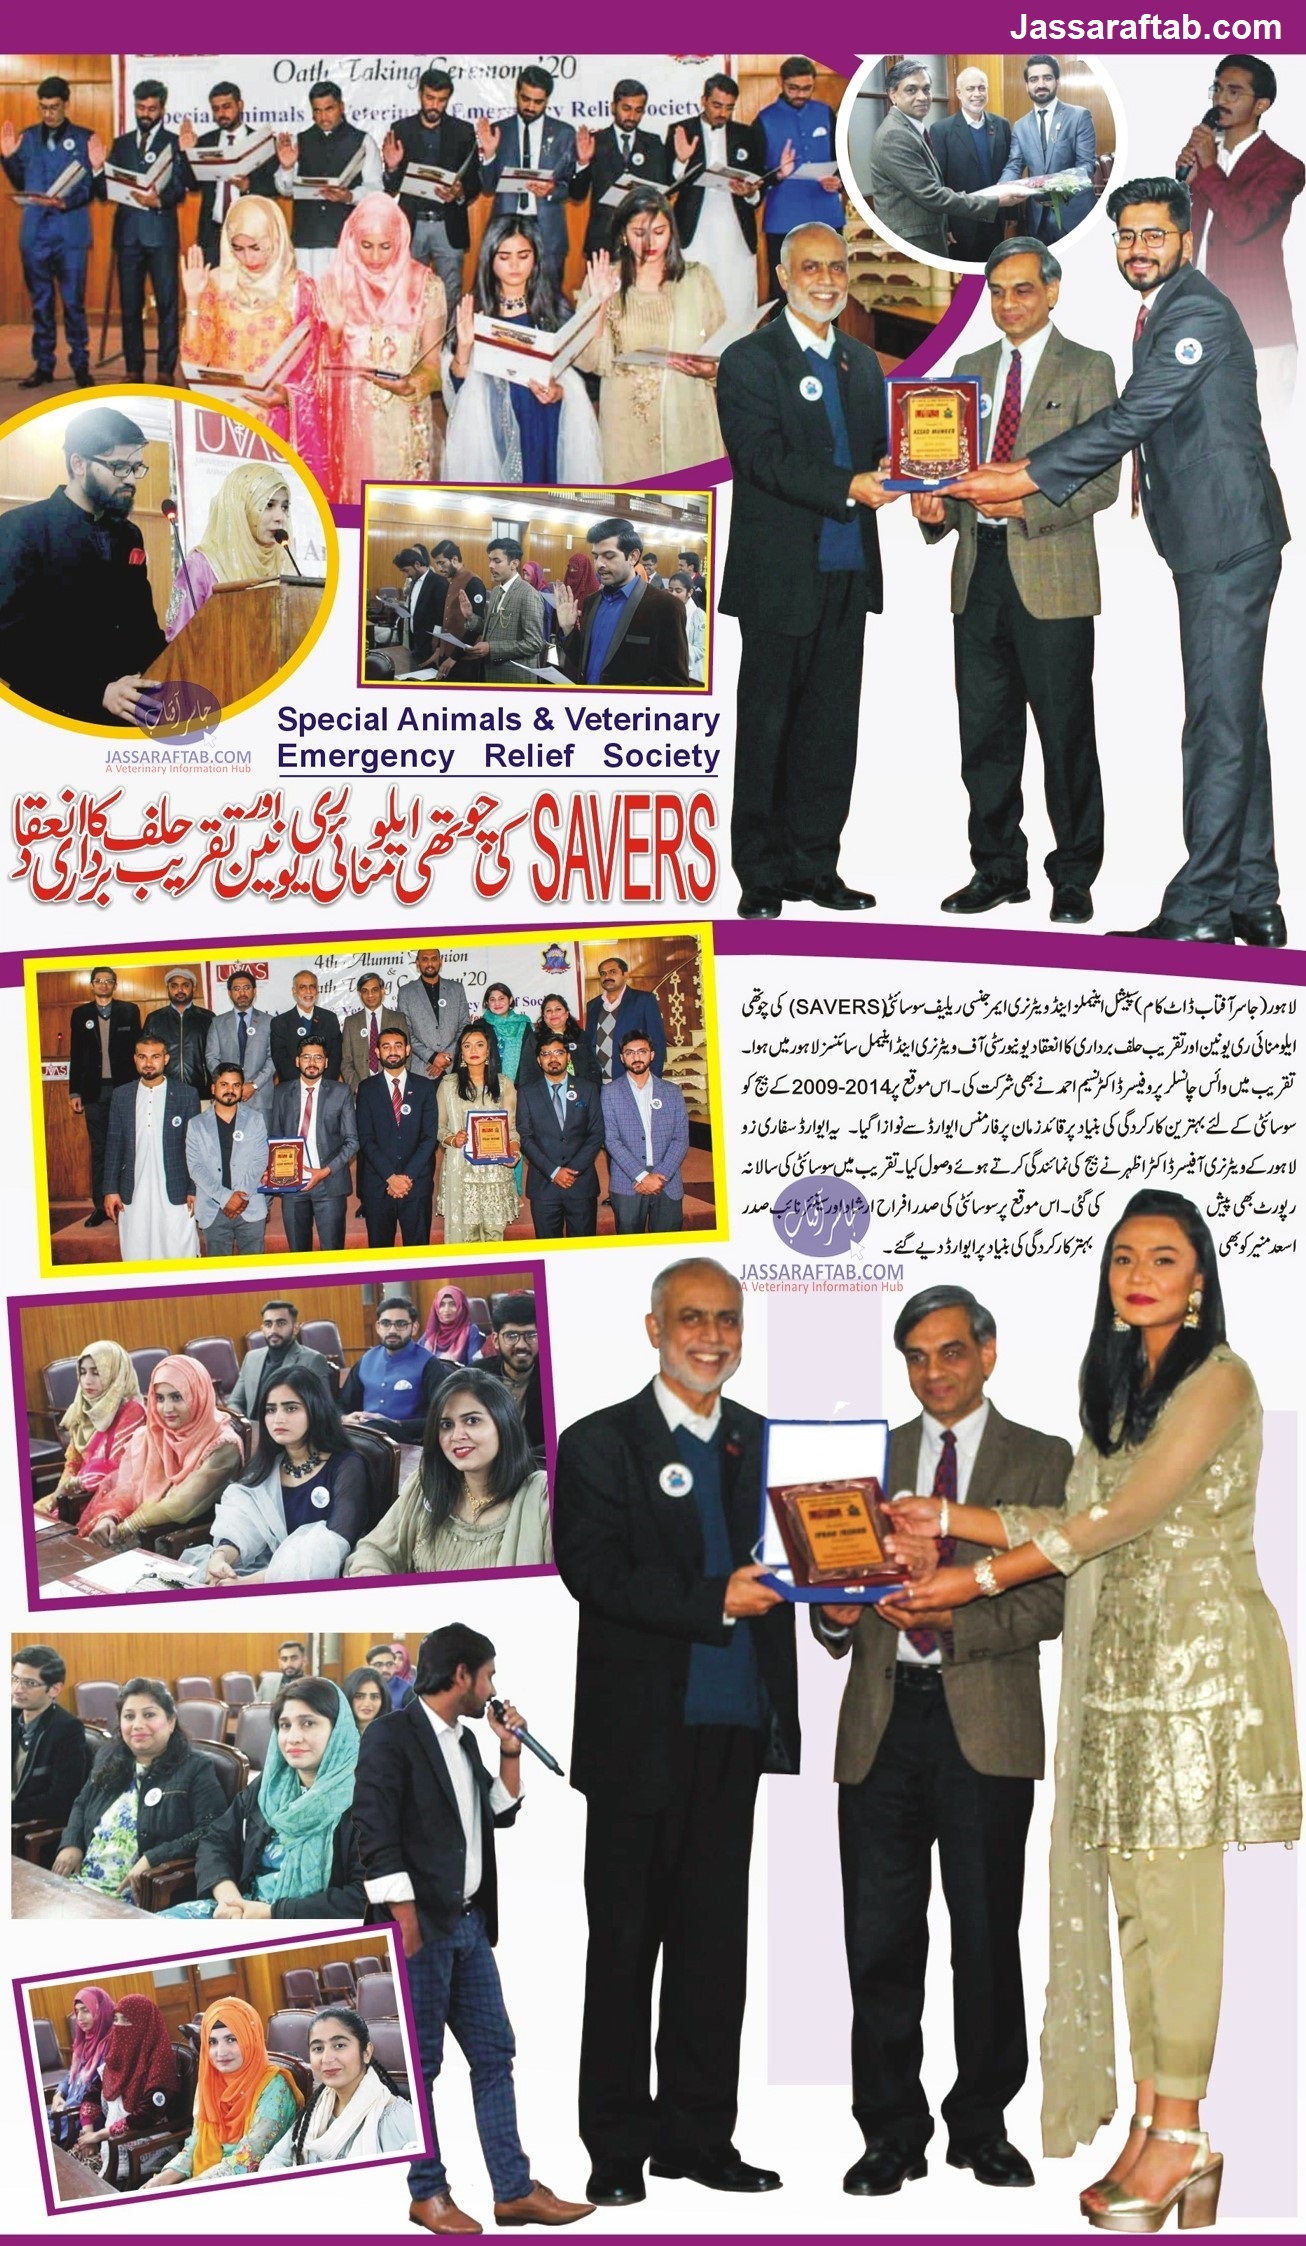 SAVERS reunion and oath taking ceremony held at UVAS